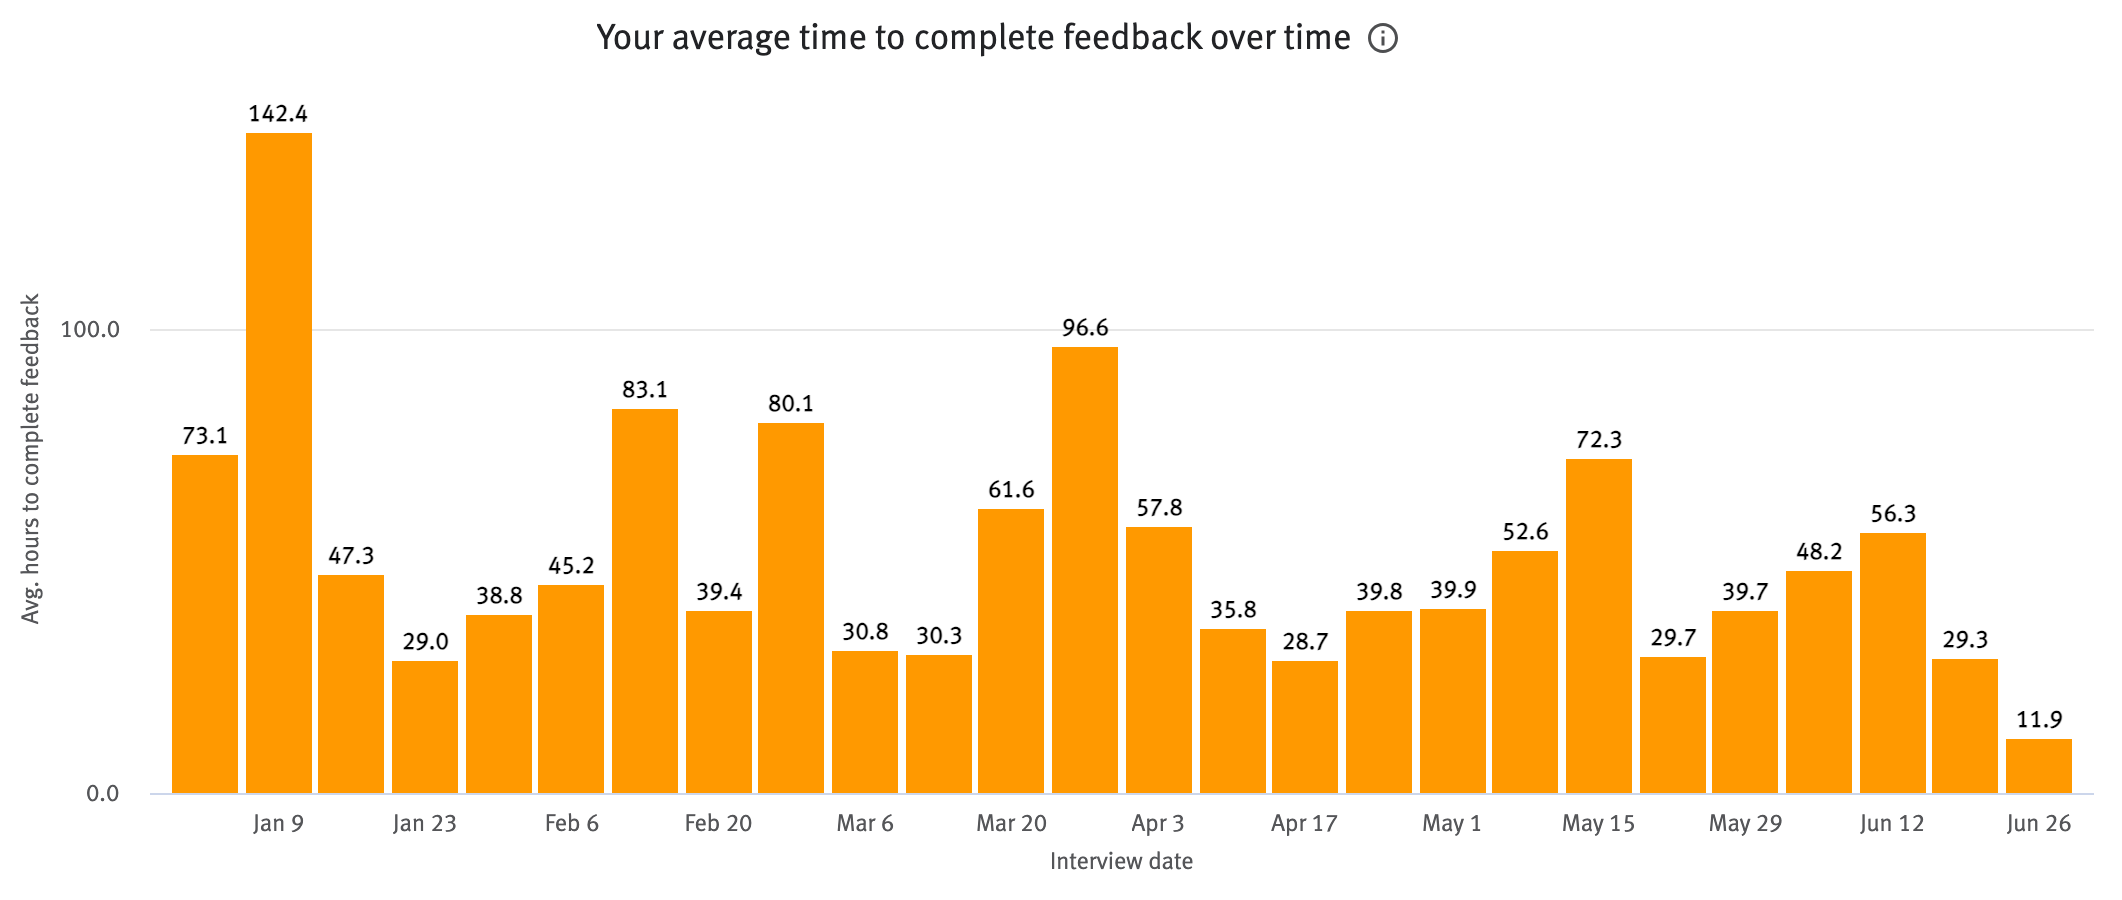 Your average time to completed feedback over time chart